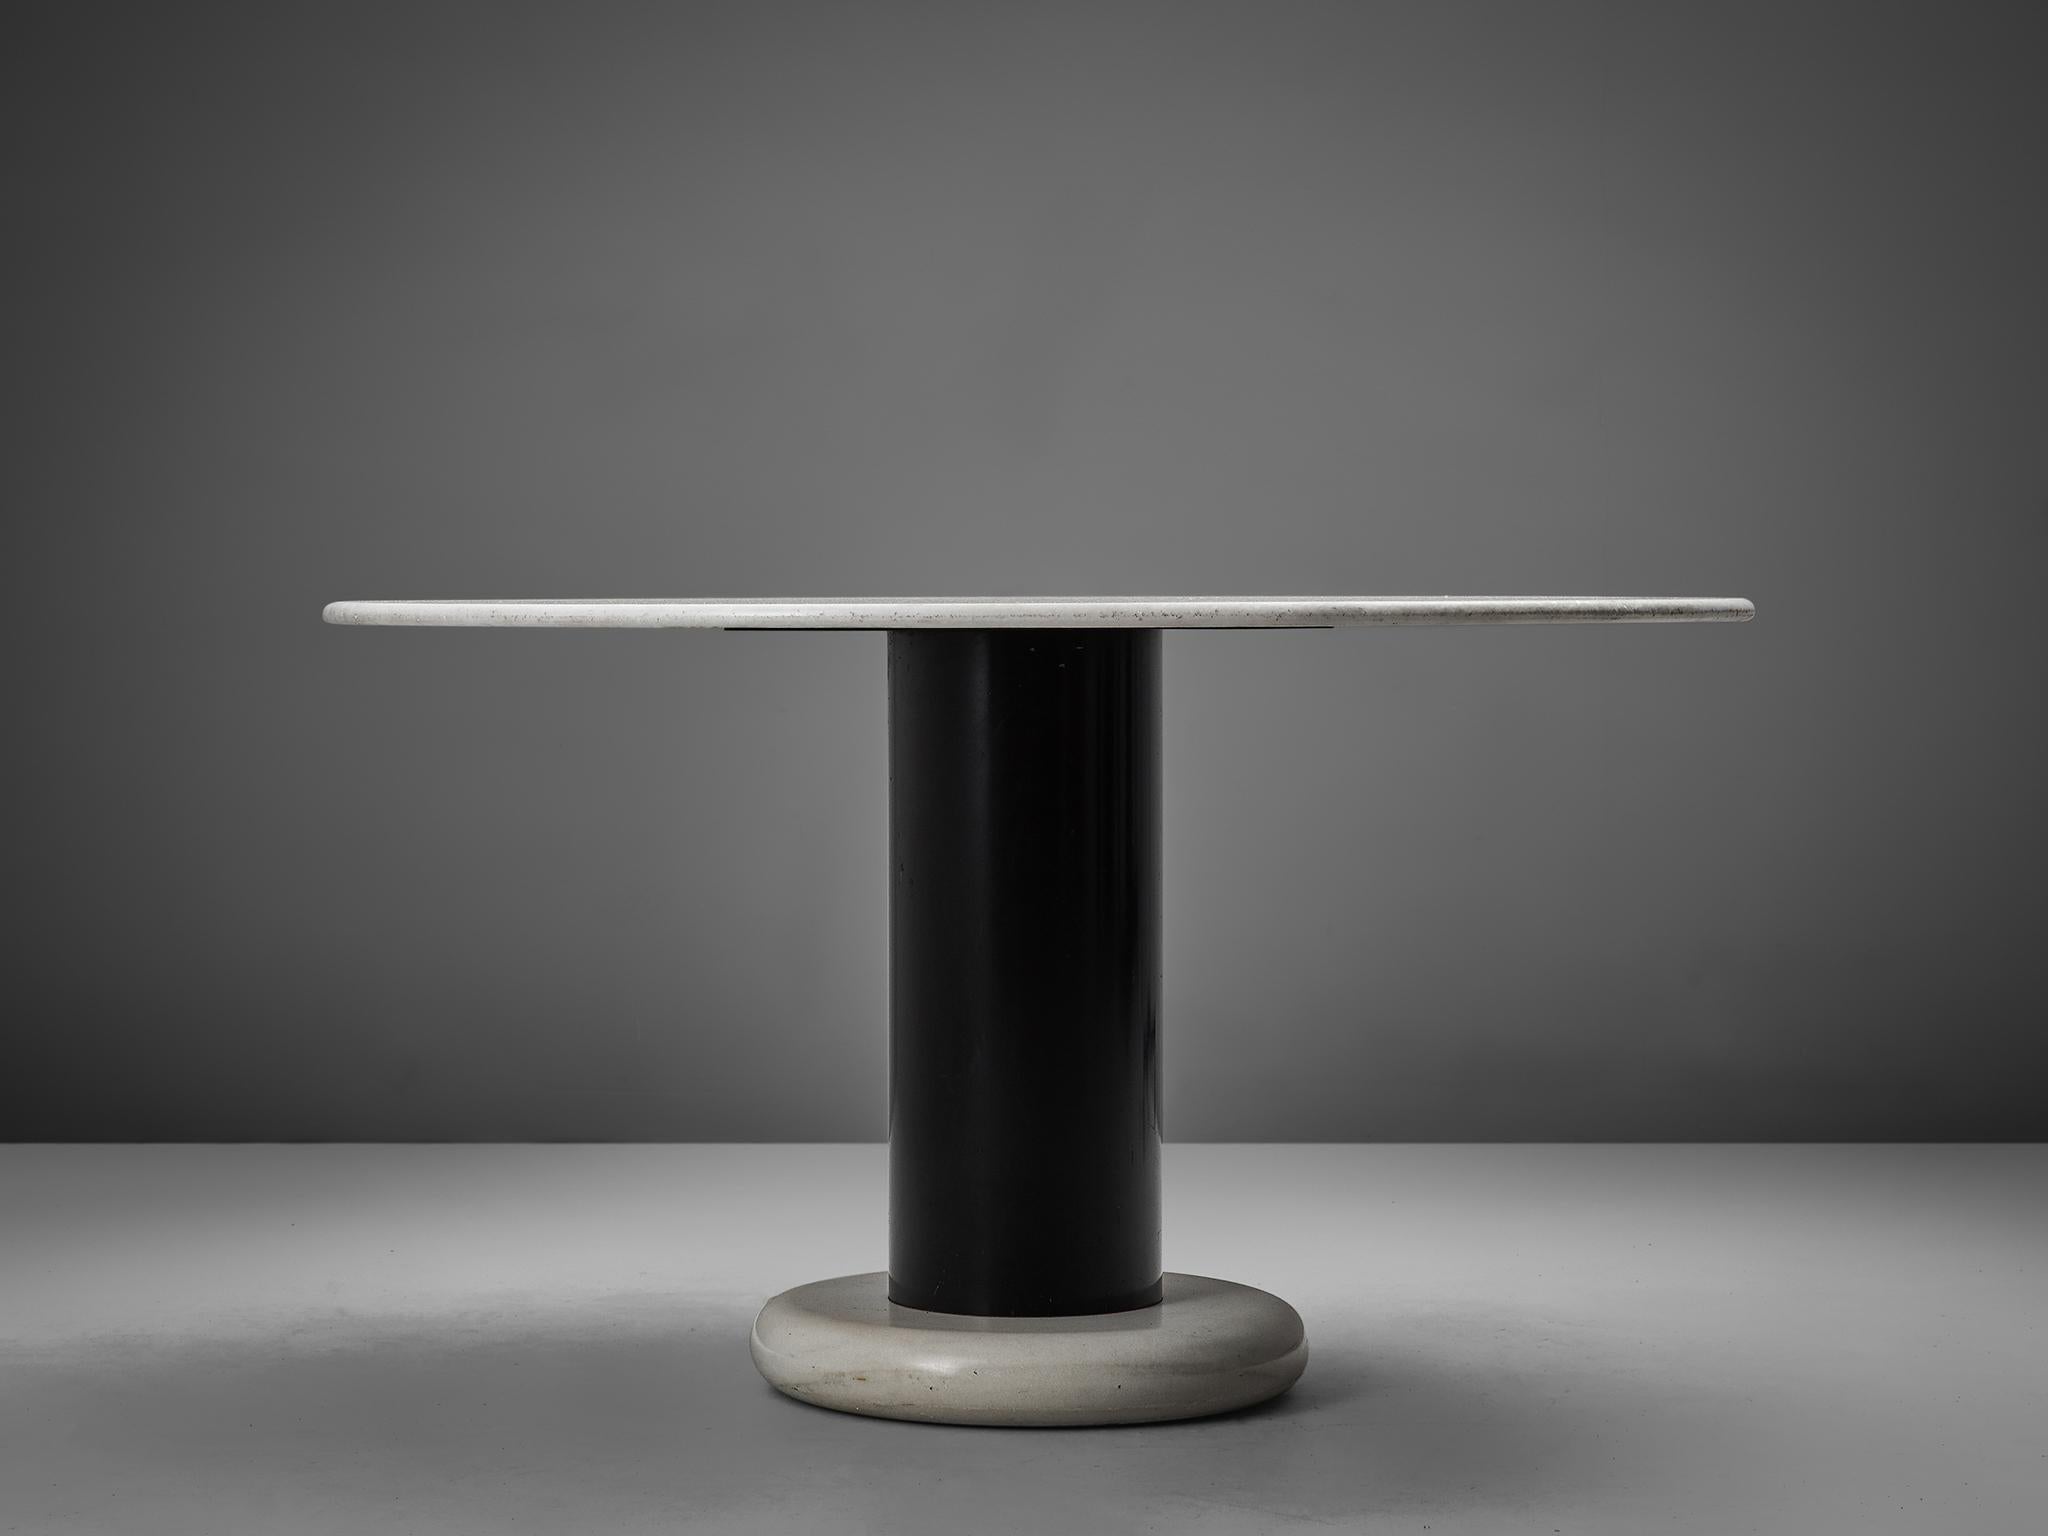 Table, in marble and metal, by Ettore Sottsass for Poltronova, Italy, 1965.

Round pedestal table by Italian designer Ettore Sottsass. A white round base with black metal cylindrical column. The round top is executed in beautiful white marble. A